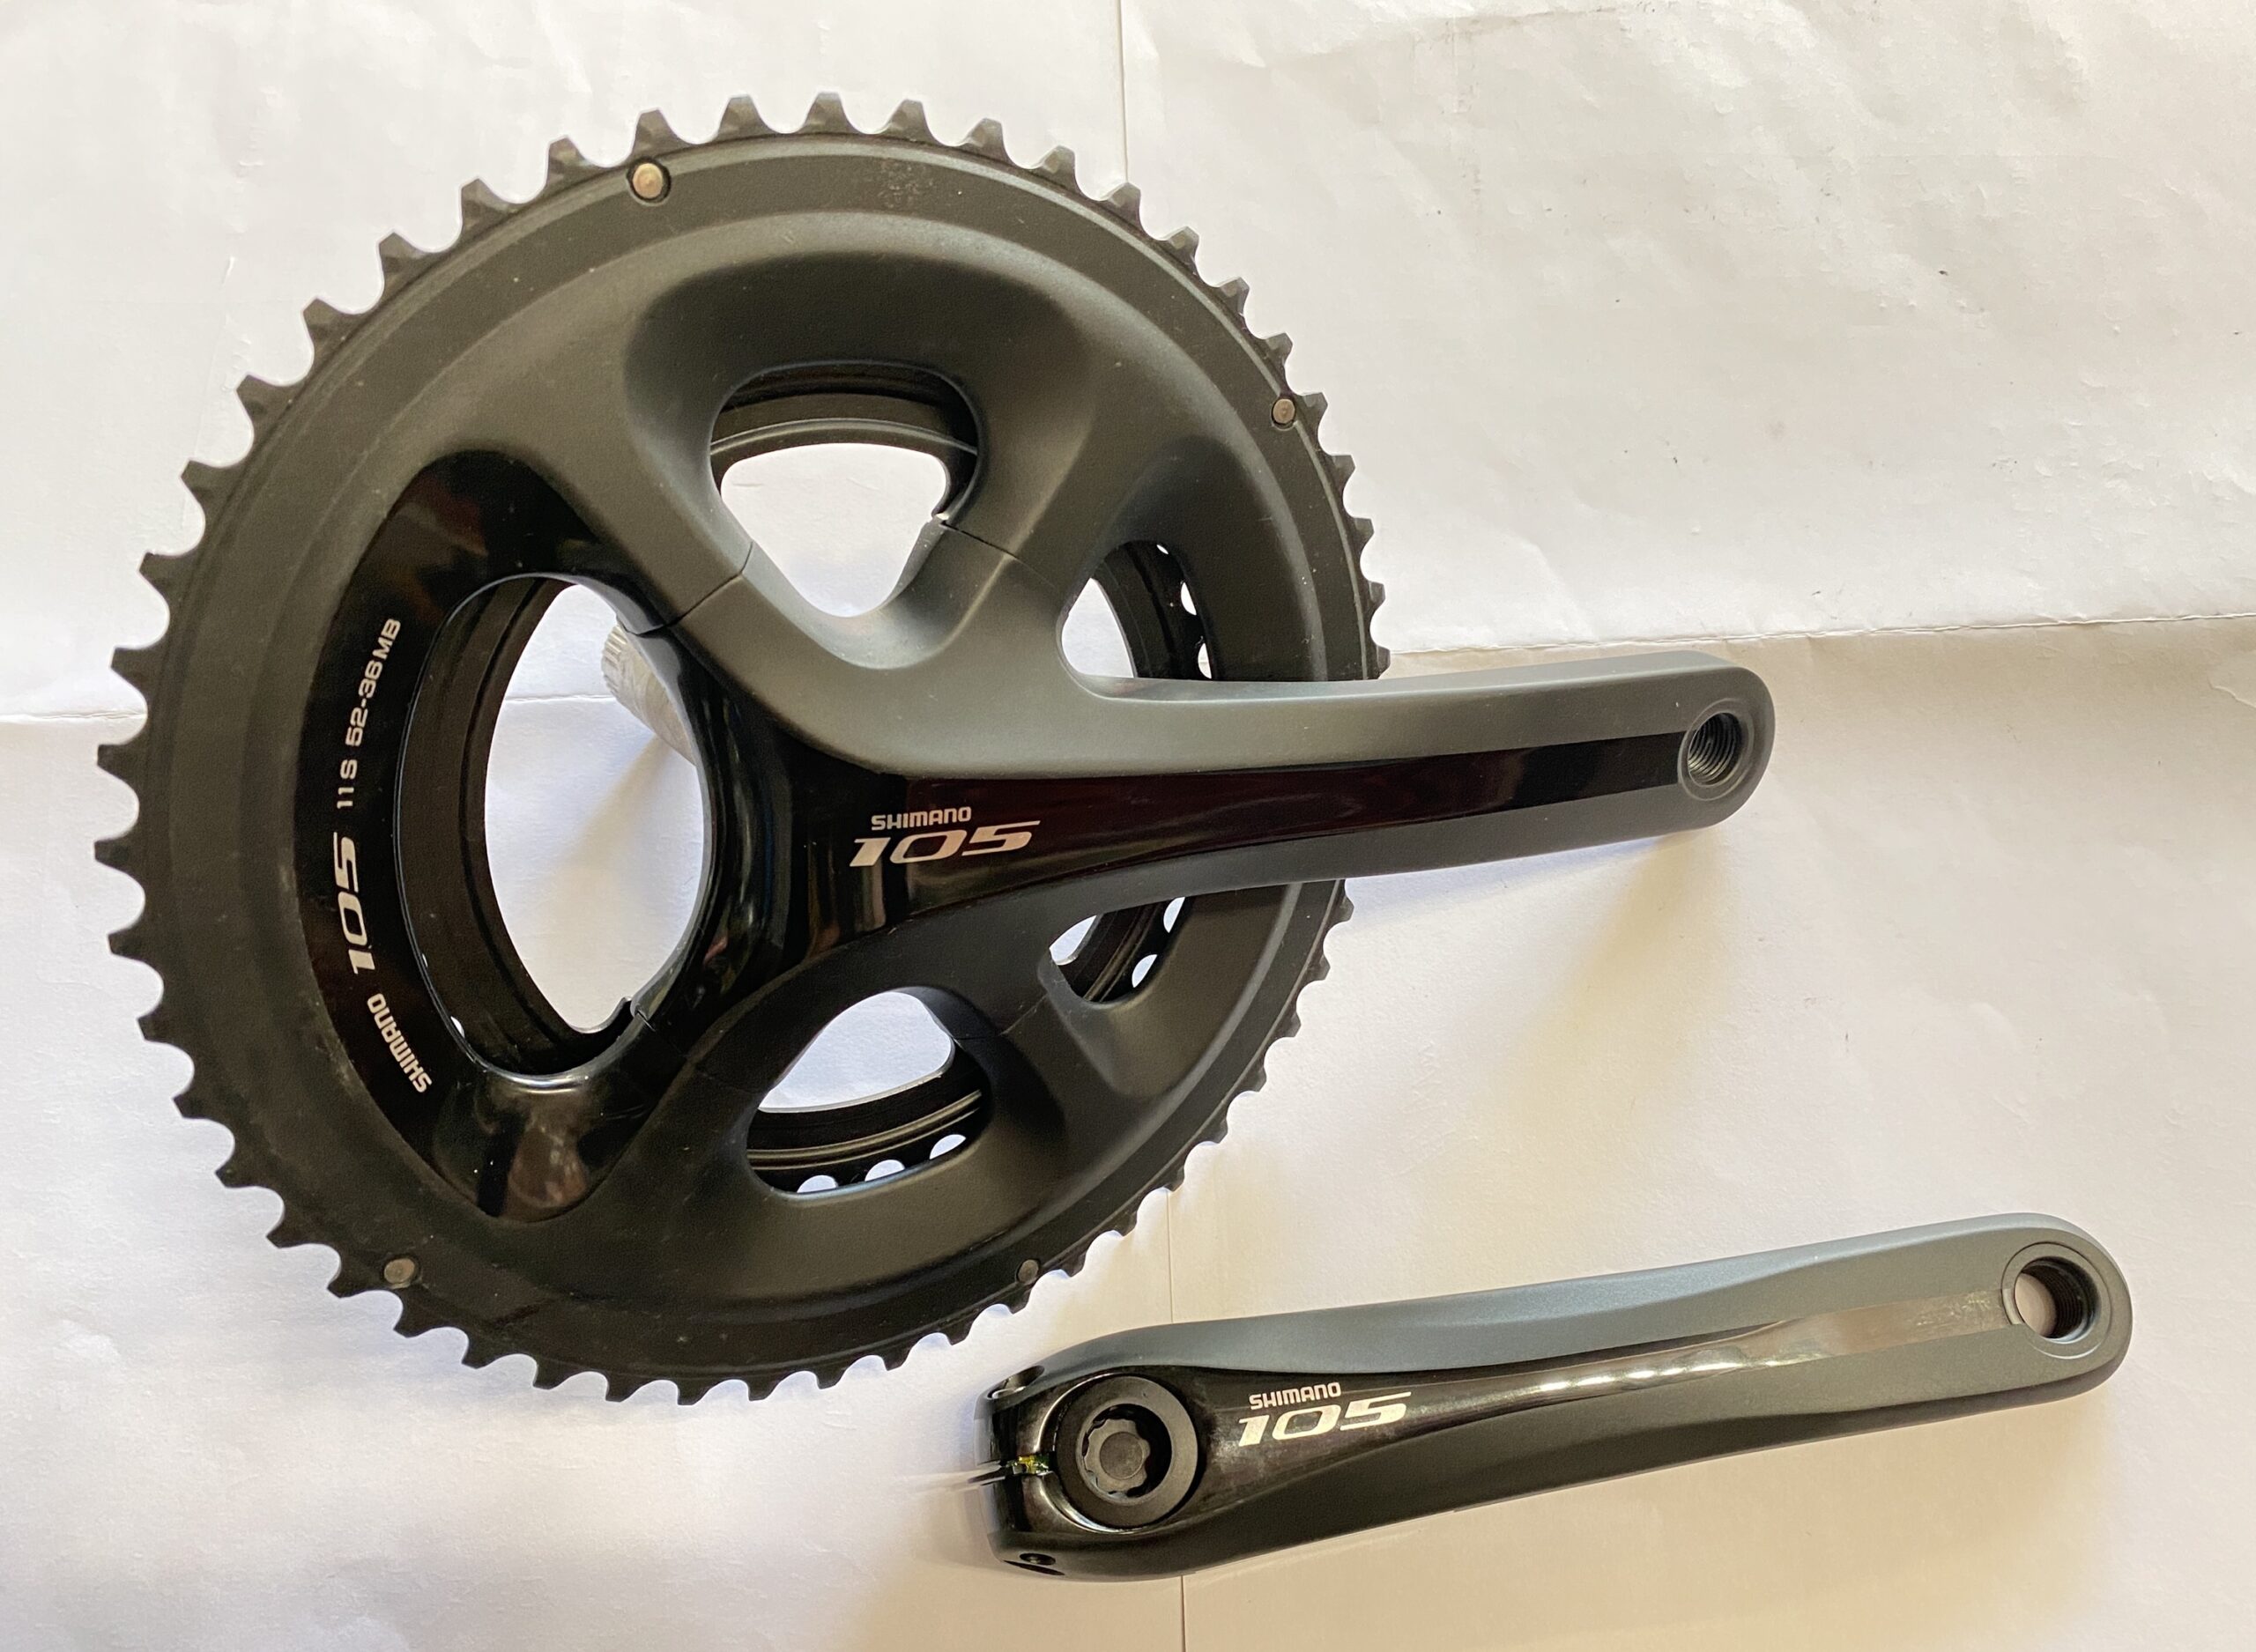 Shimano 105 FC-5800 11 Speed Double Chainset 52/36